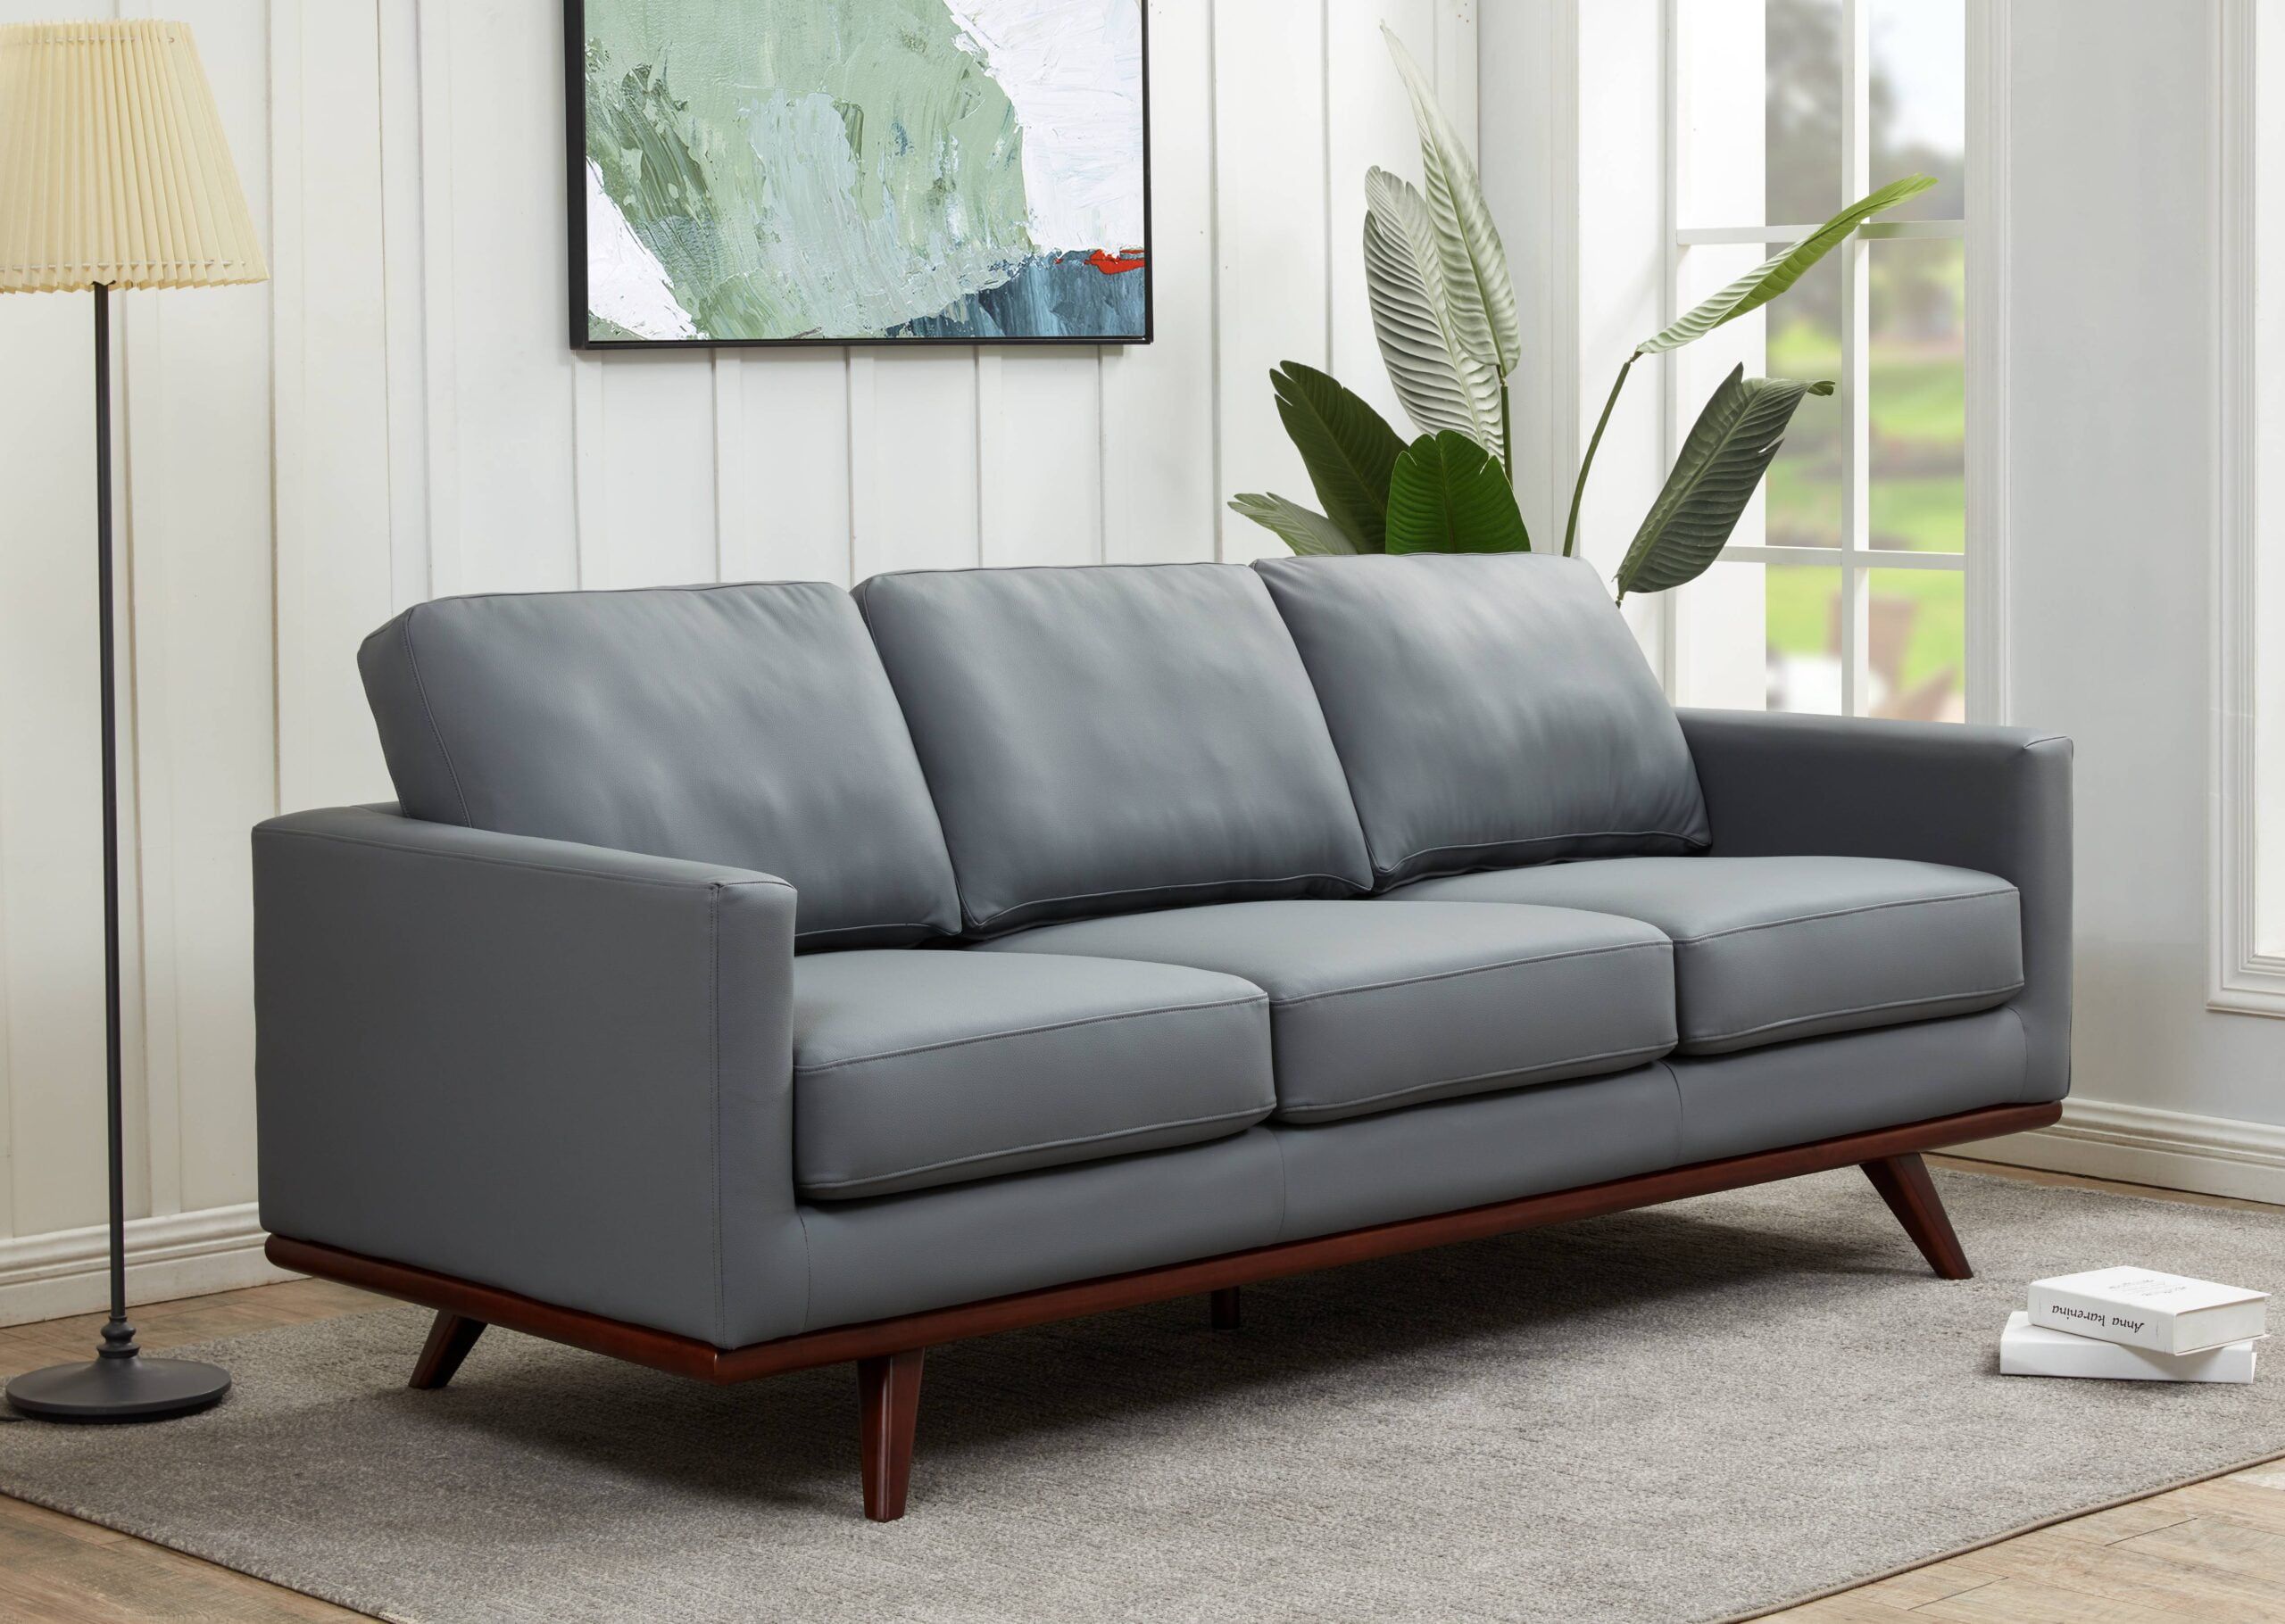 Leisuremod Chester Modern Leather 3 Seater Sofa With Birch Wood Base Mid  Century Living Room Couch (Grey) – Walmart Inside Mid Century 3 Seat Couches (View 3 of 15)